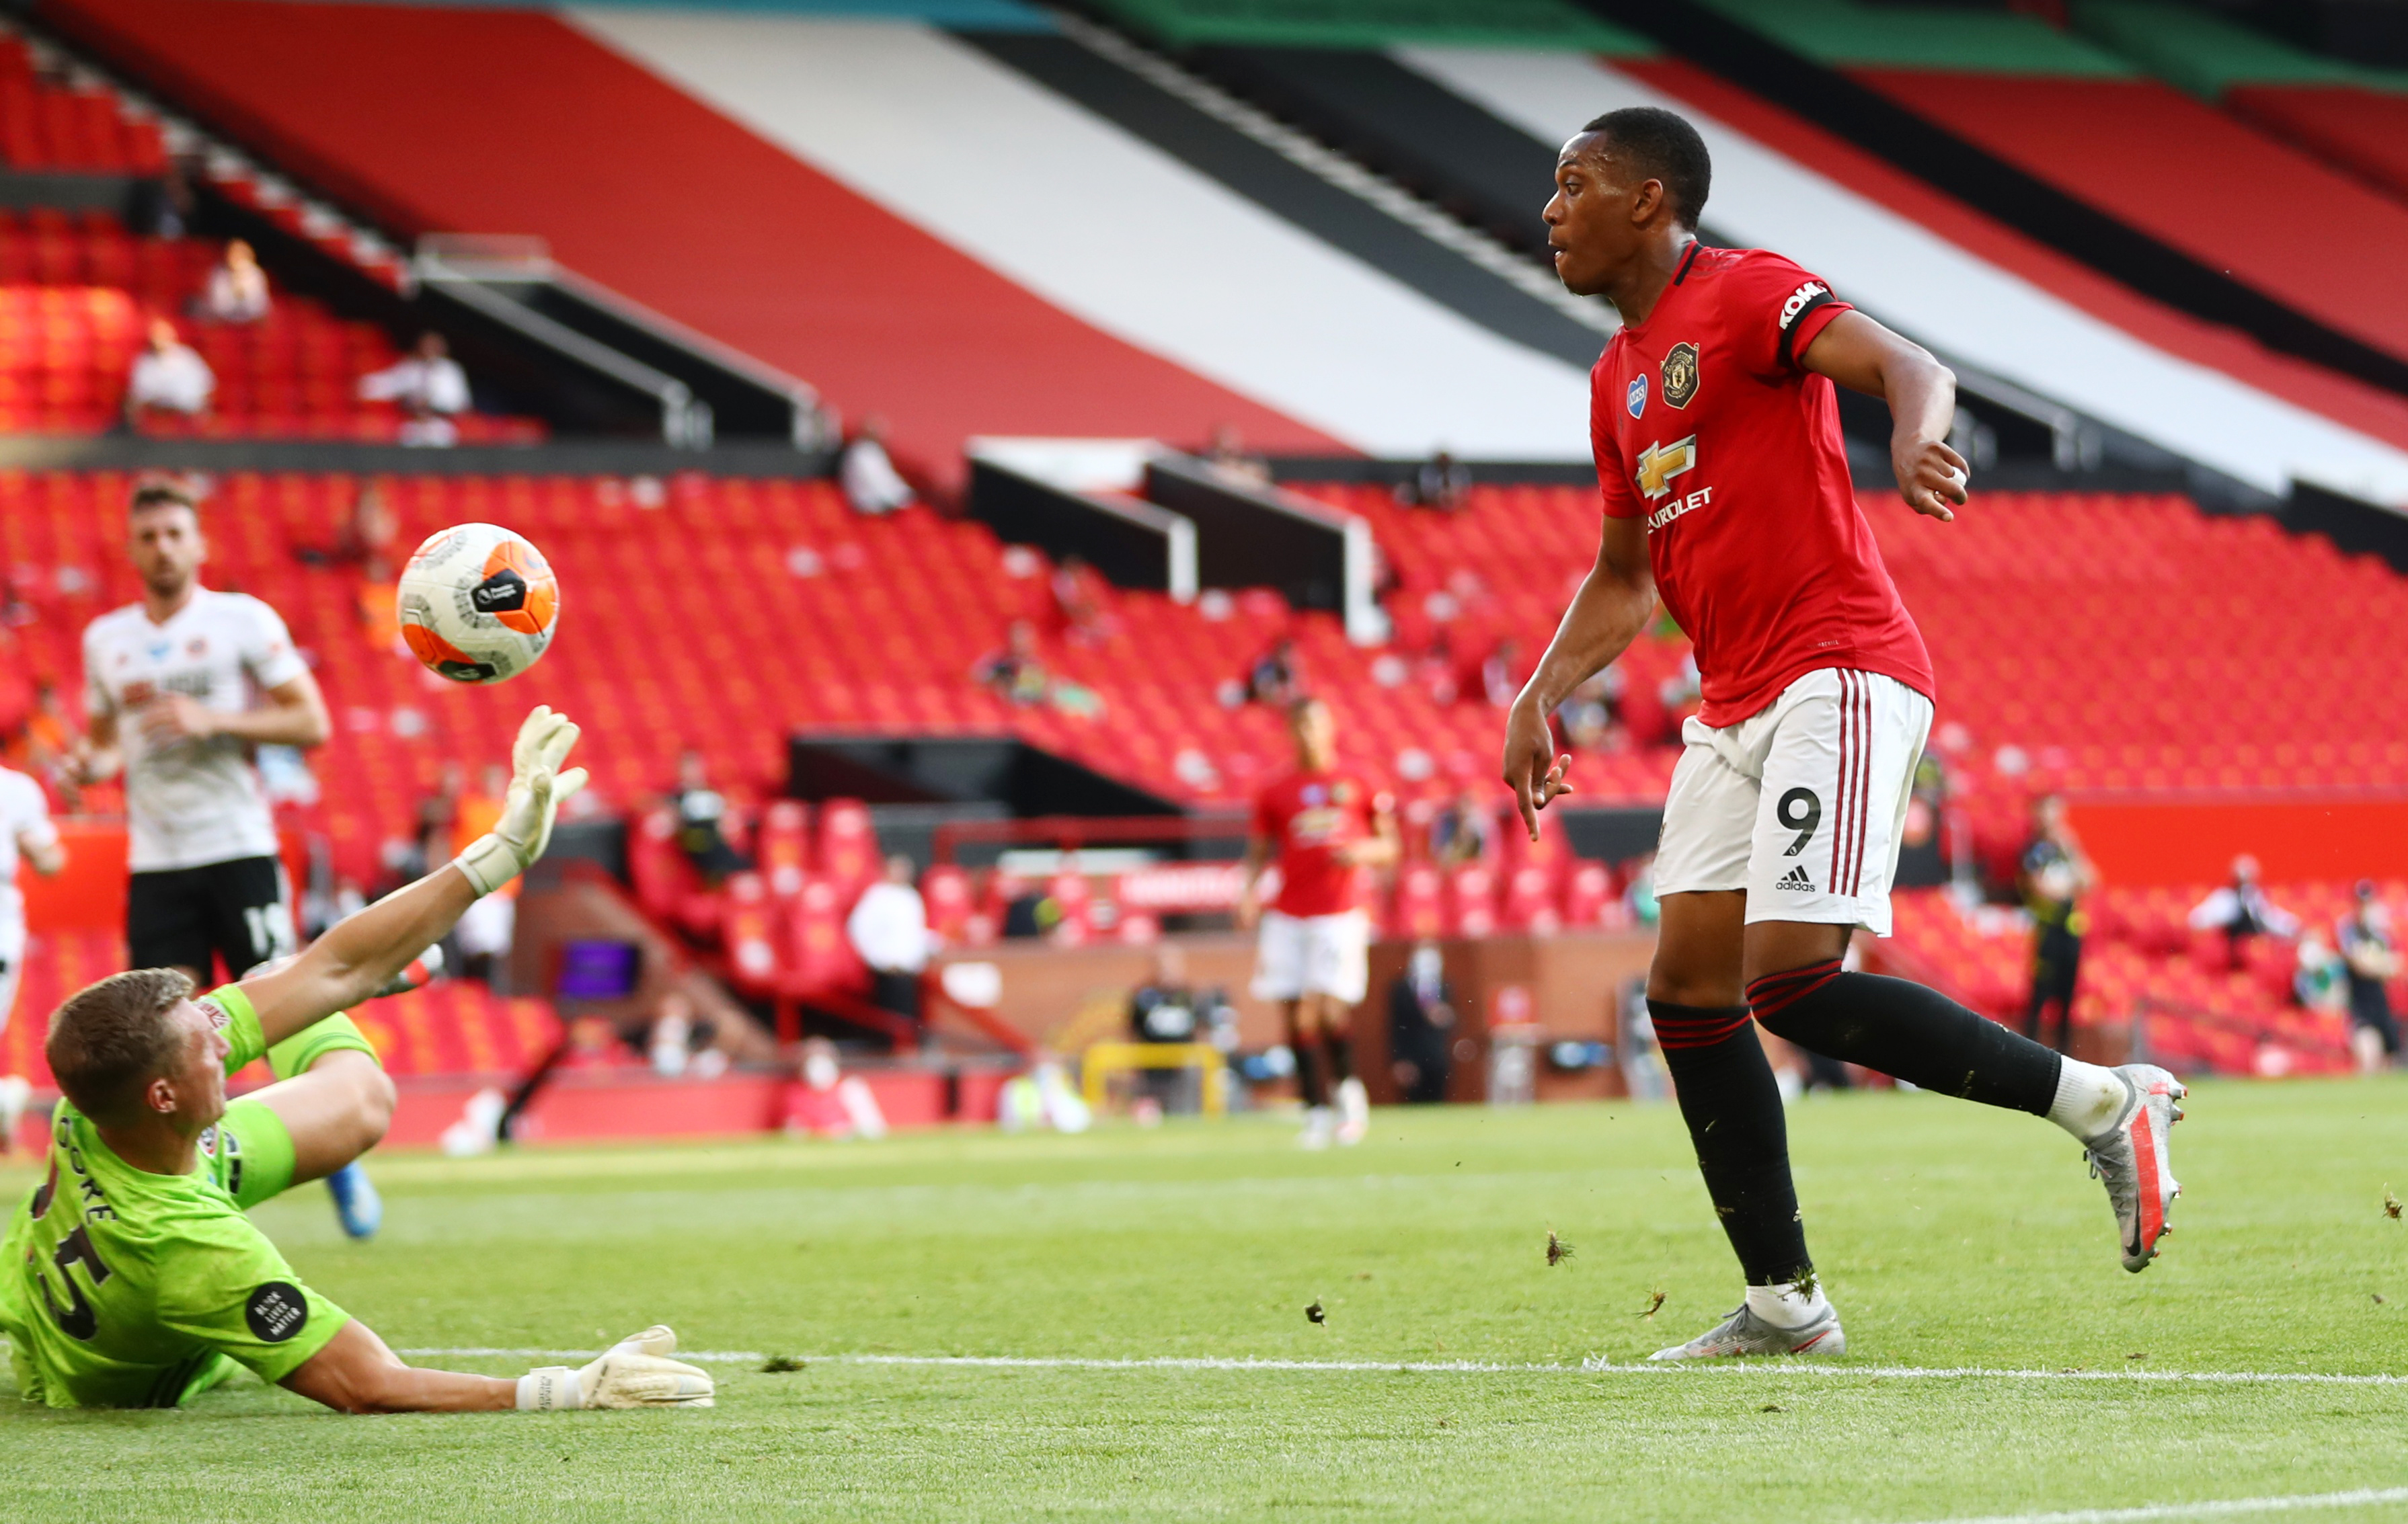 Manchester United's Anthony Martial scores their third goal to complete his hat-trick, as play resumes behind closed doors following the outbreak of the coronavirus disease (COVID-19)  during the Premier League match between Manchester United and Sheffield United, at Old Trafford, in Manchester, Britain, on June 24, 2020. Photo: Michael Steele/Pool via Reuters